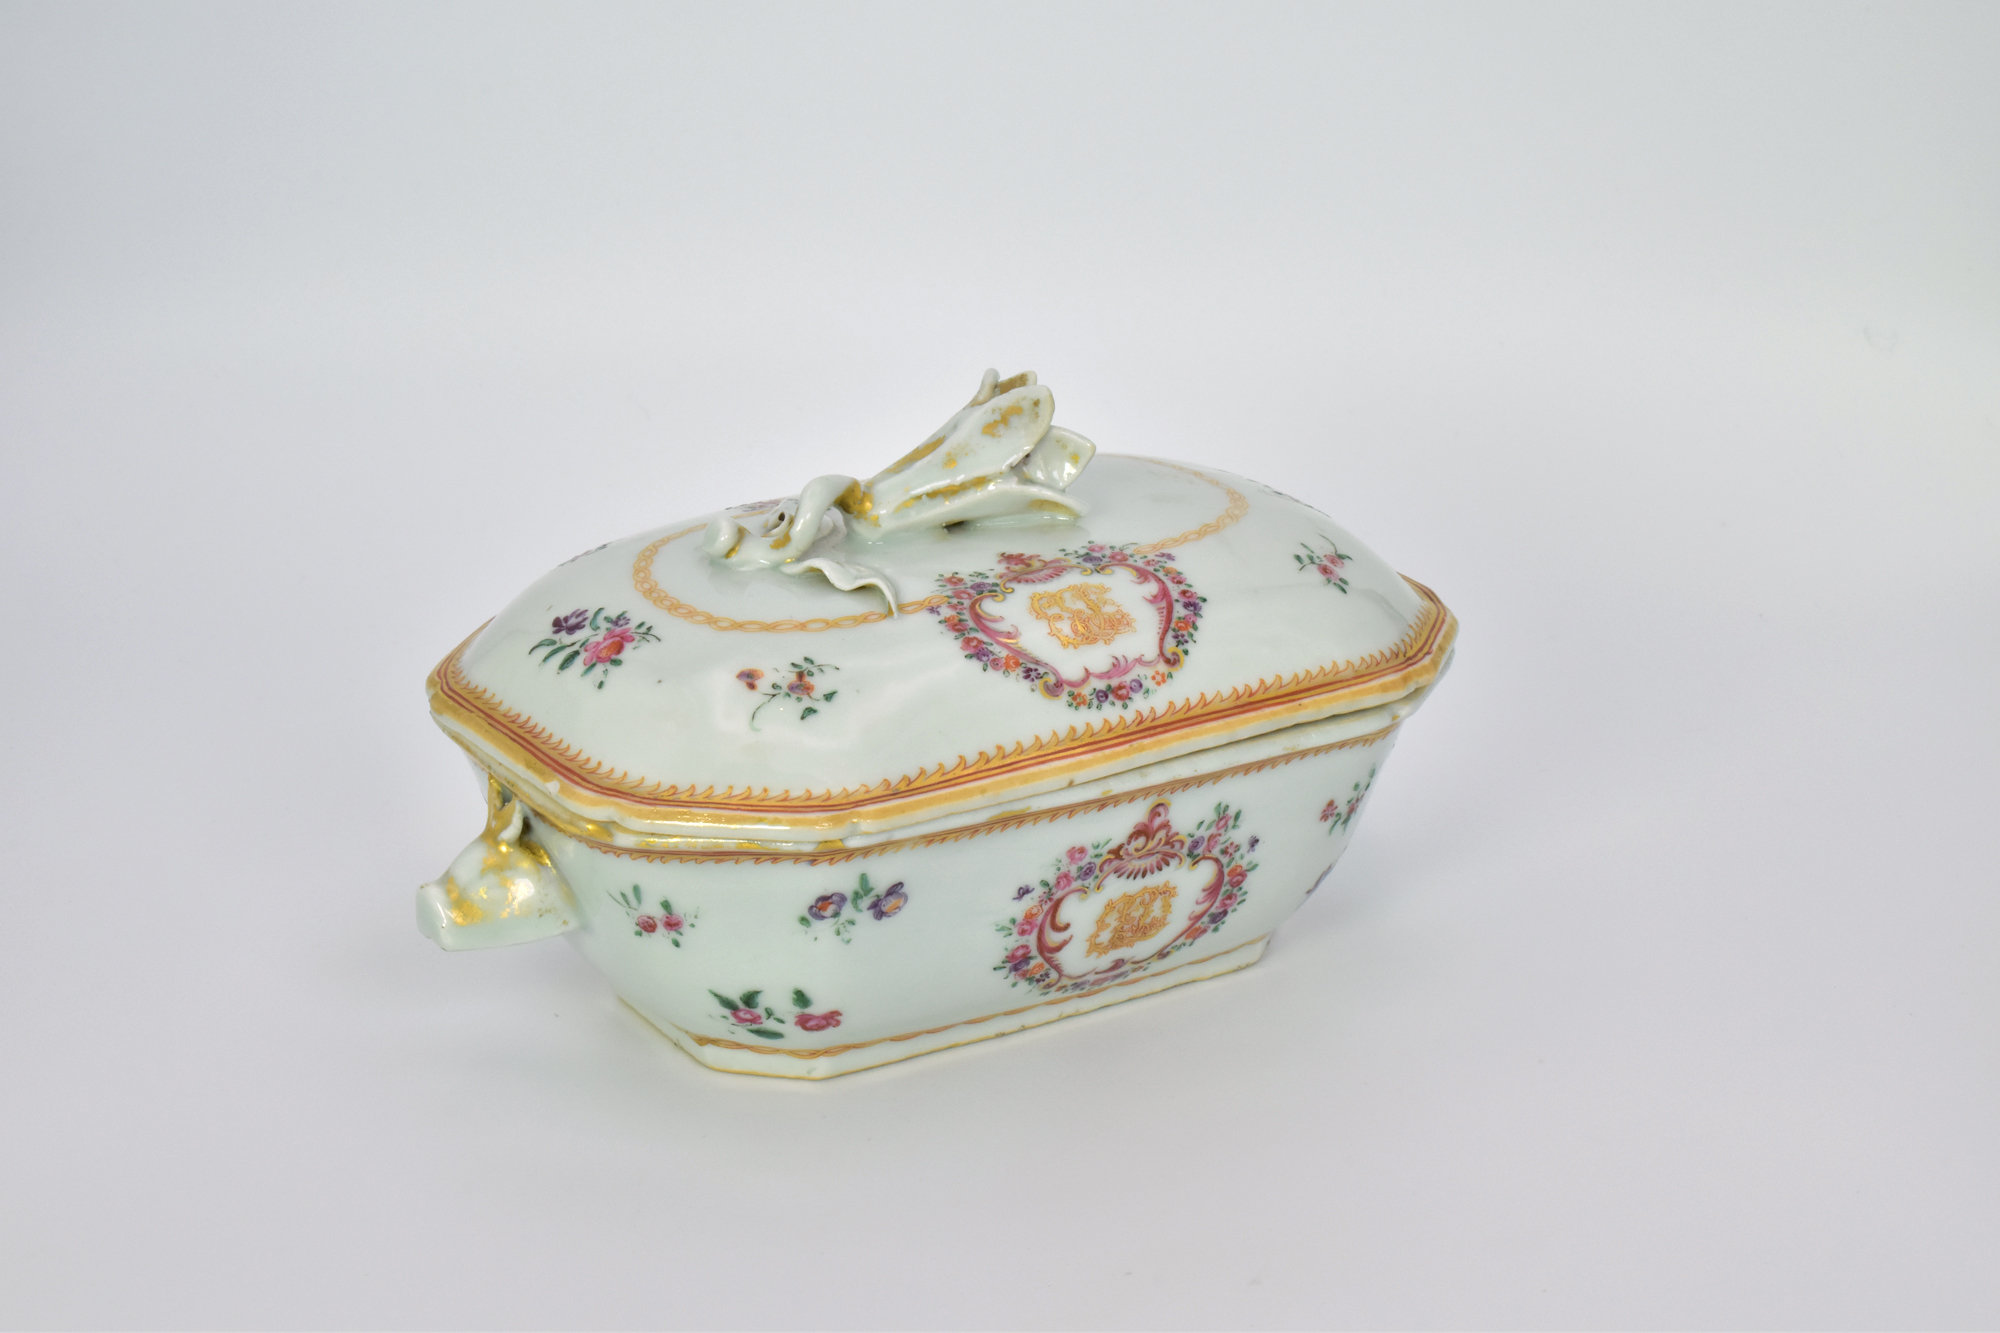 A CHINESE EXPORT ‘FAMILLE-ROSE’ PORCELAIN SAUCE TUREEN AND COVER, QIANLONG PERIOD, 1736 – 1795